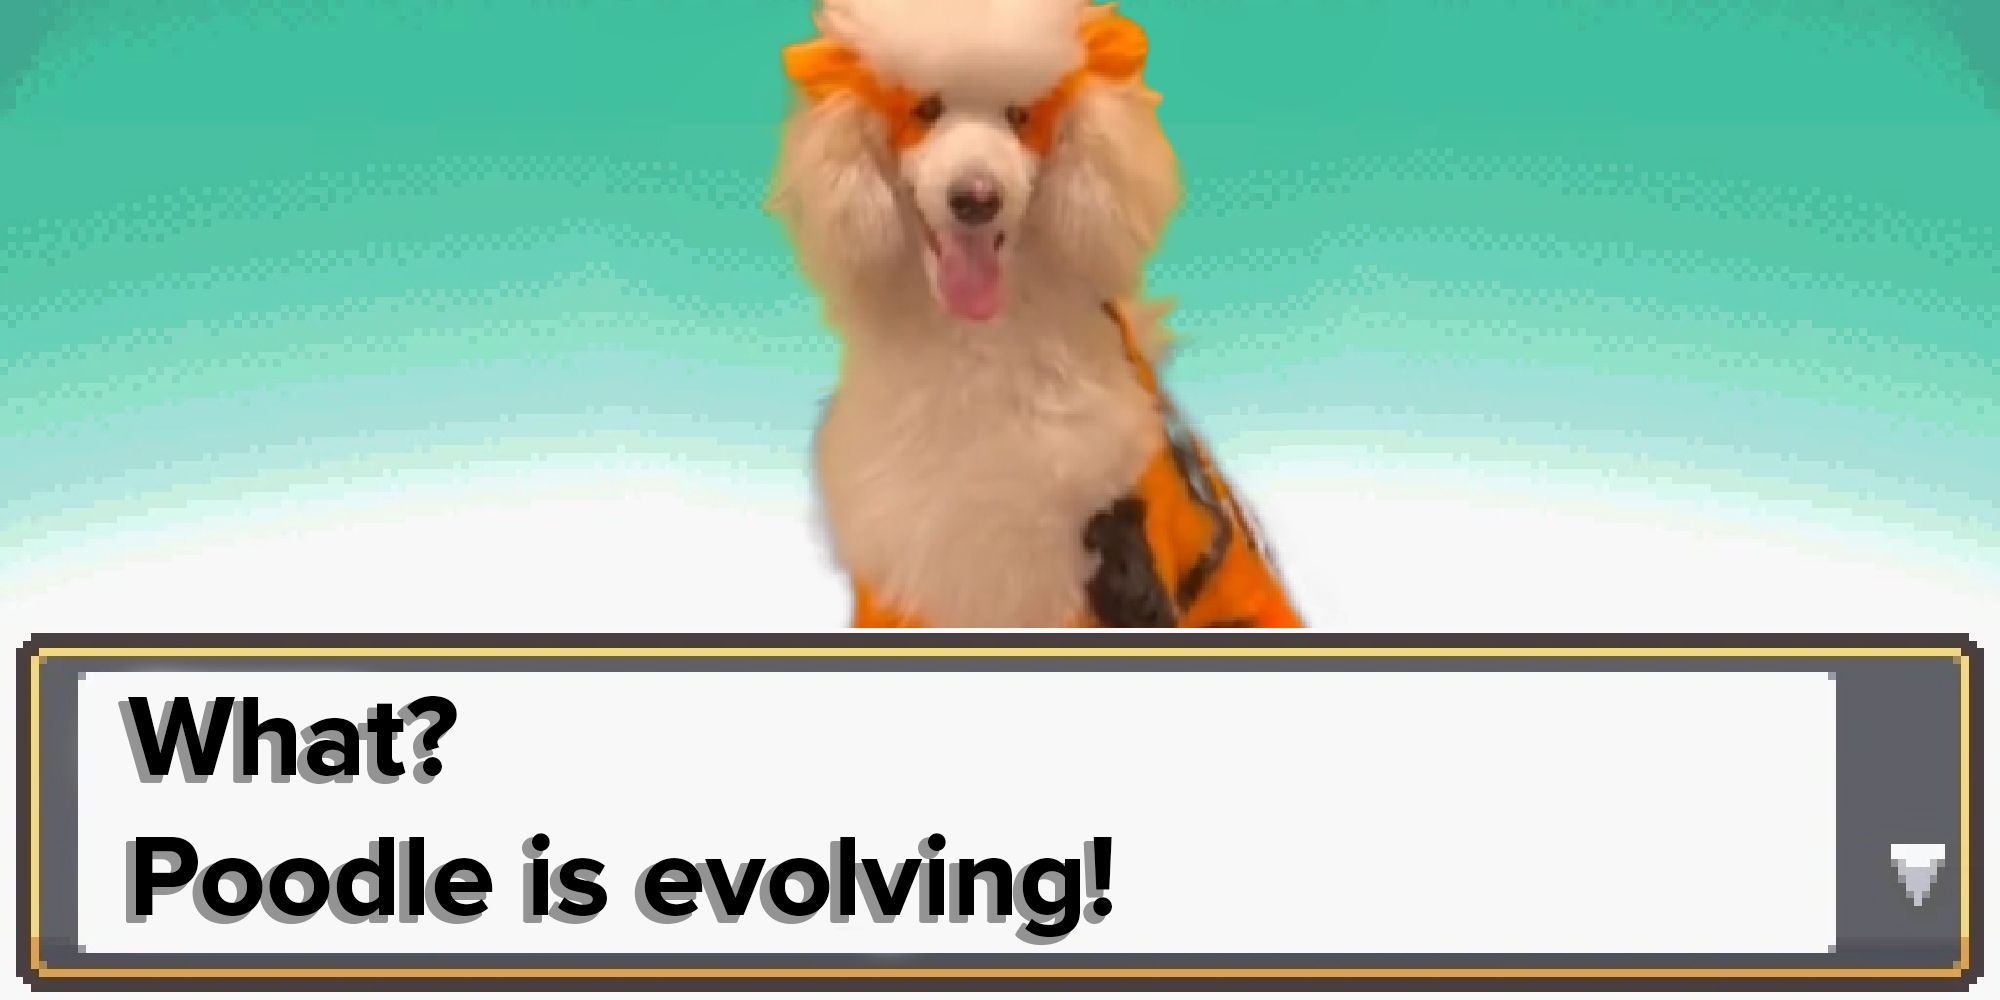 Poodle is evolving